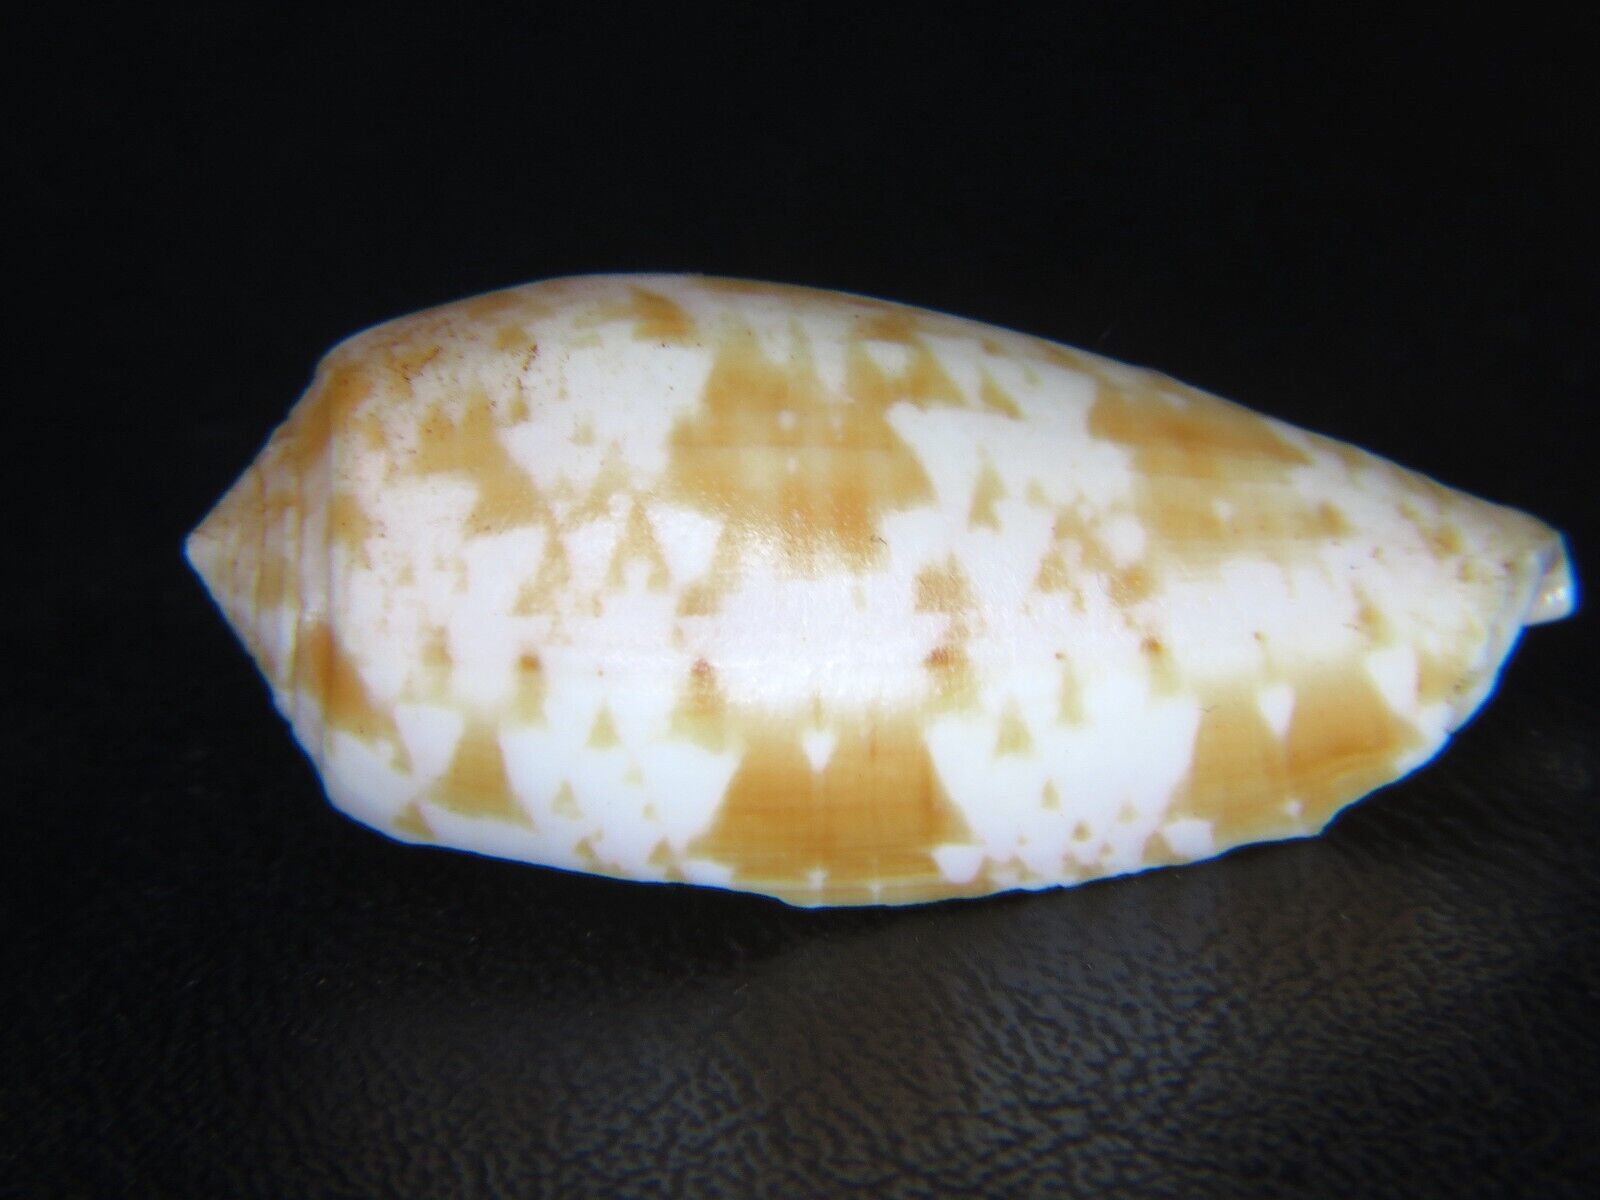 CONUS BULLATUS: FOSSILIZED @ 36.95MM FROM BARBERS POINT HARBOR DREDGINGS